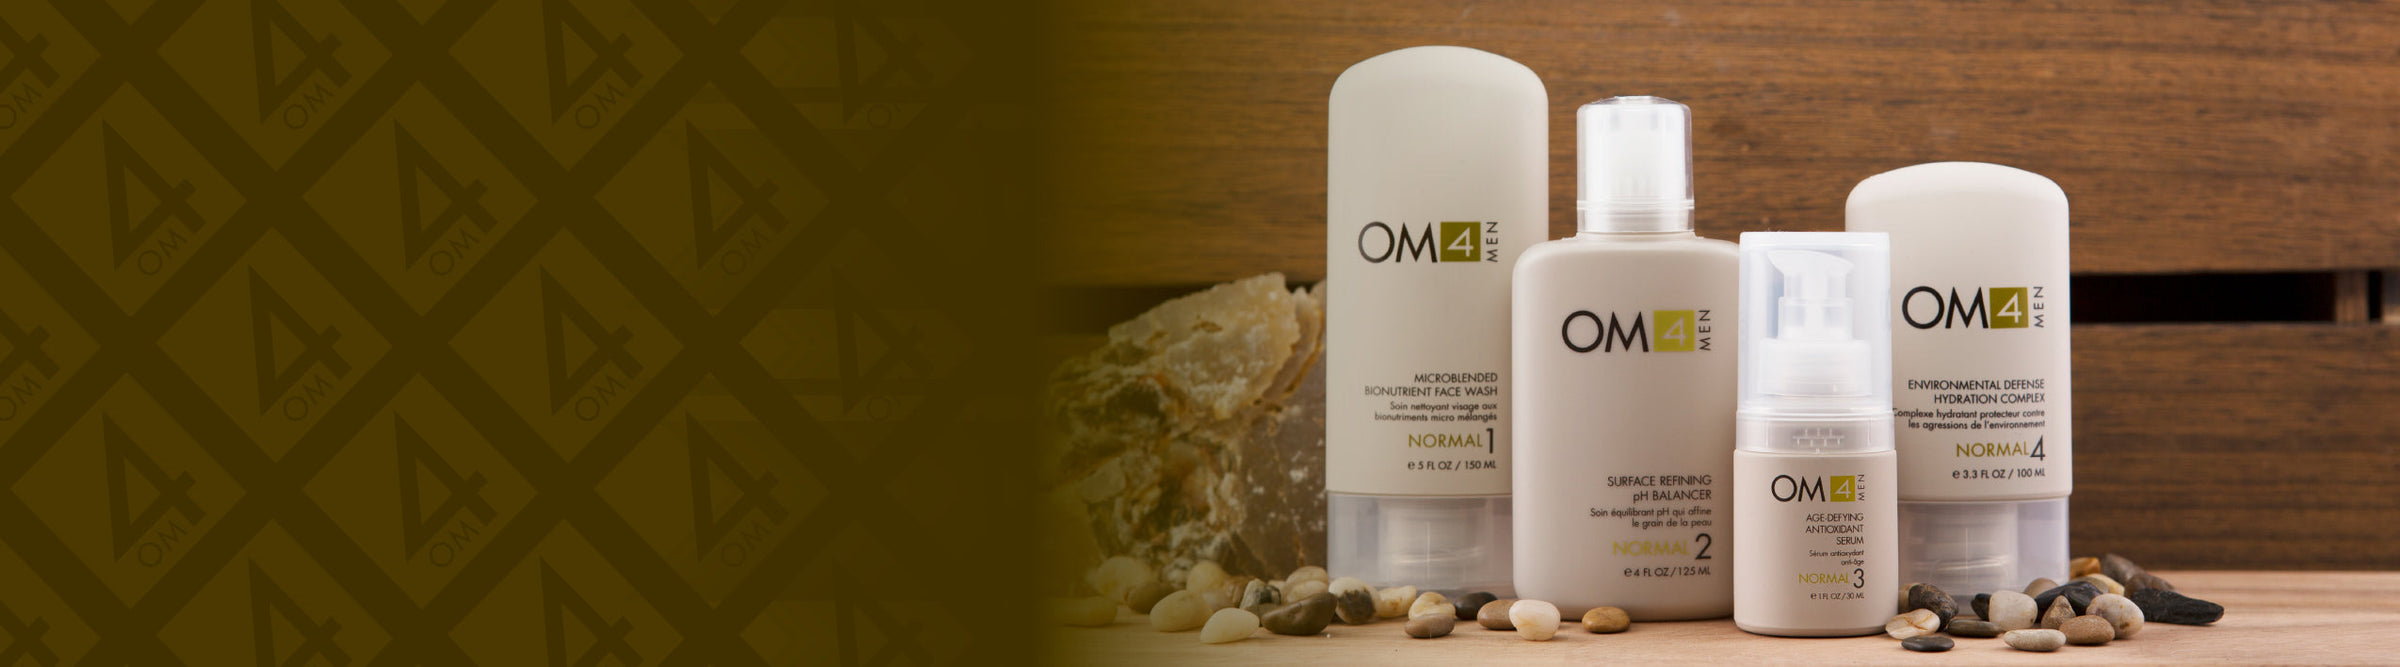 OM4 Organic Male Normal Collection